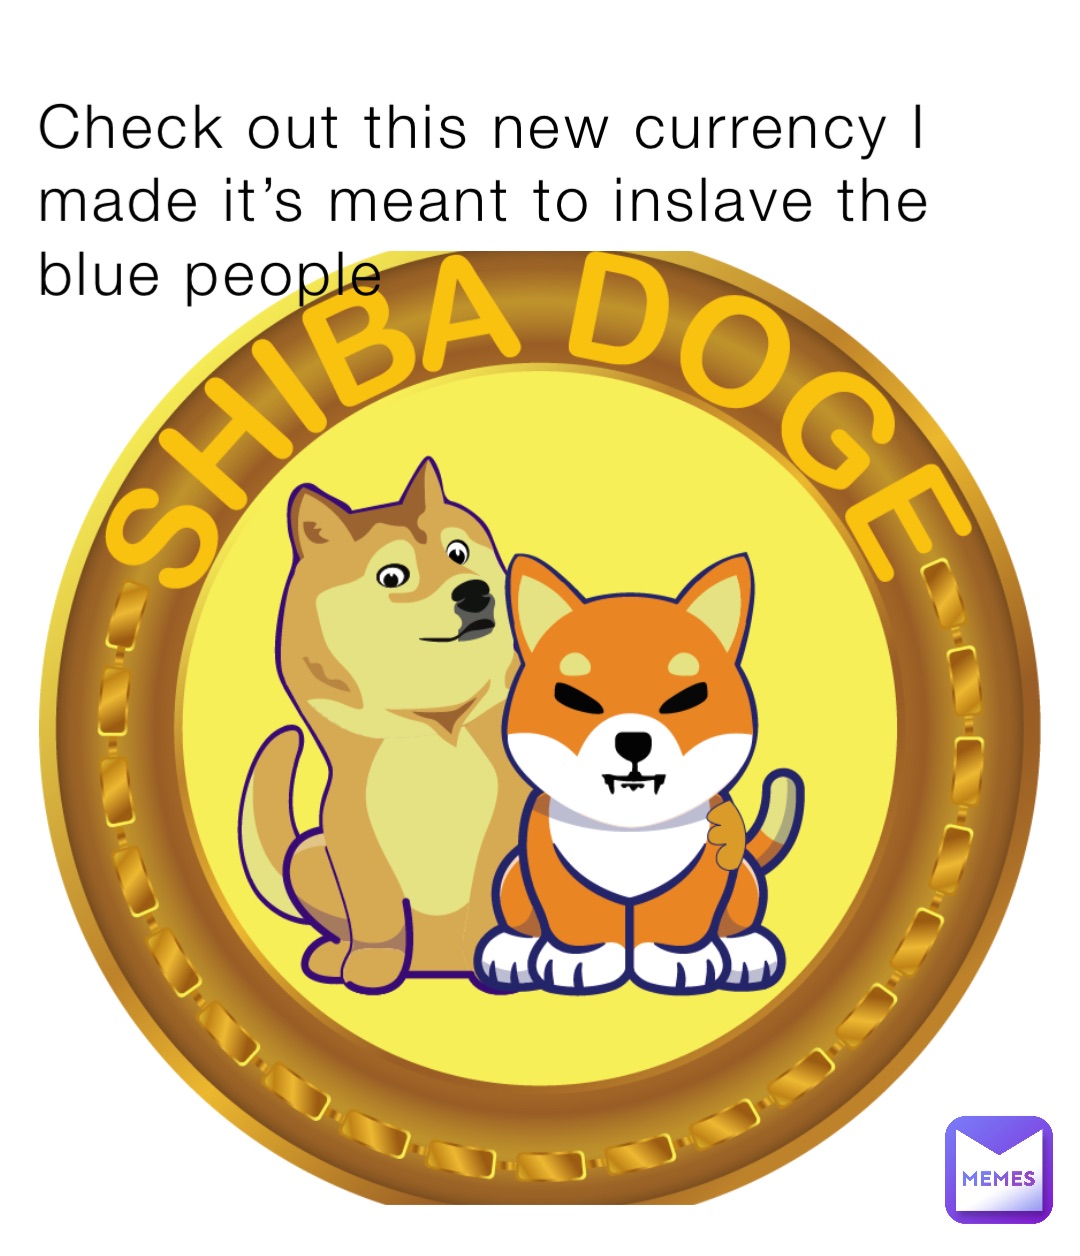 Check out this new currency I made it’s meant to inslave the blue people